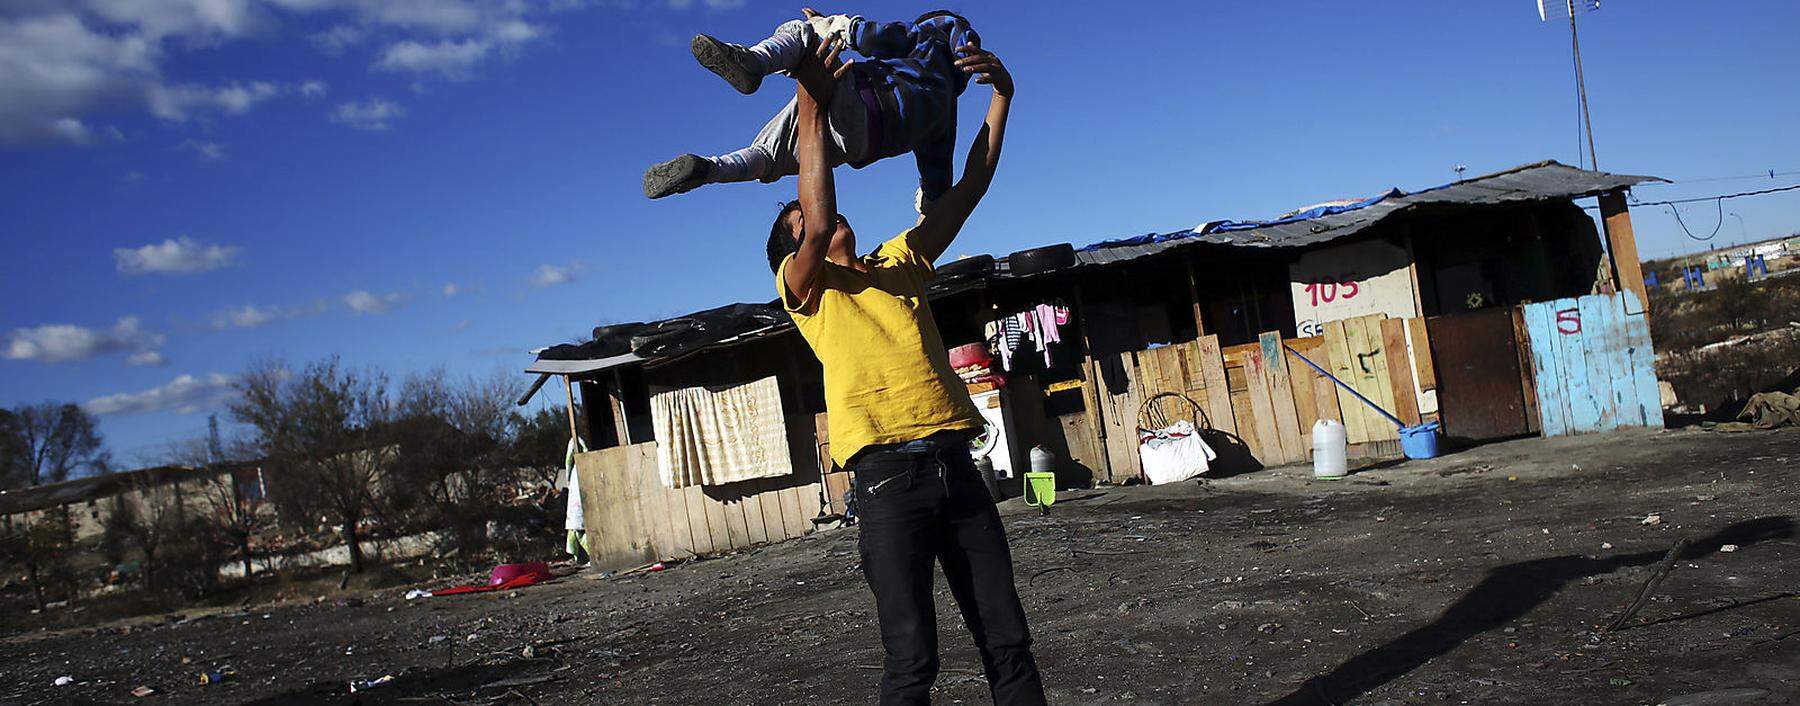 Leon throws his brother Samuel in the air as they play outside their home in the shanty town settlement of El Gallinero, in the outskirts of Madrid